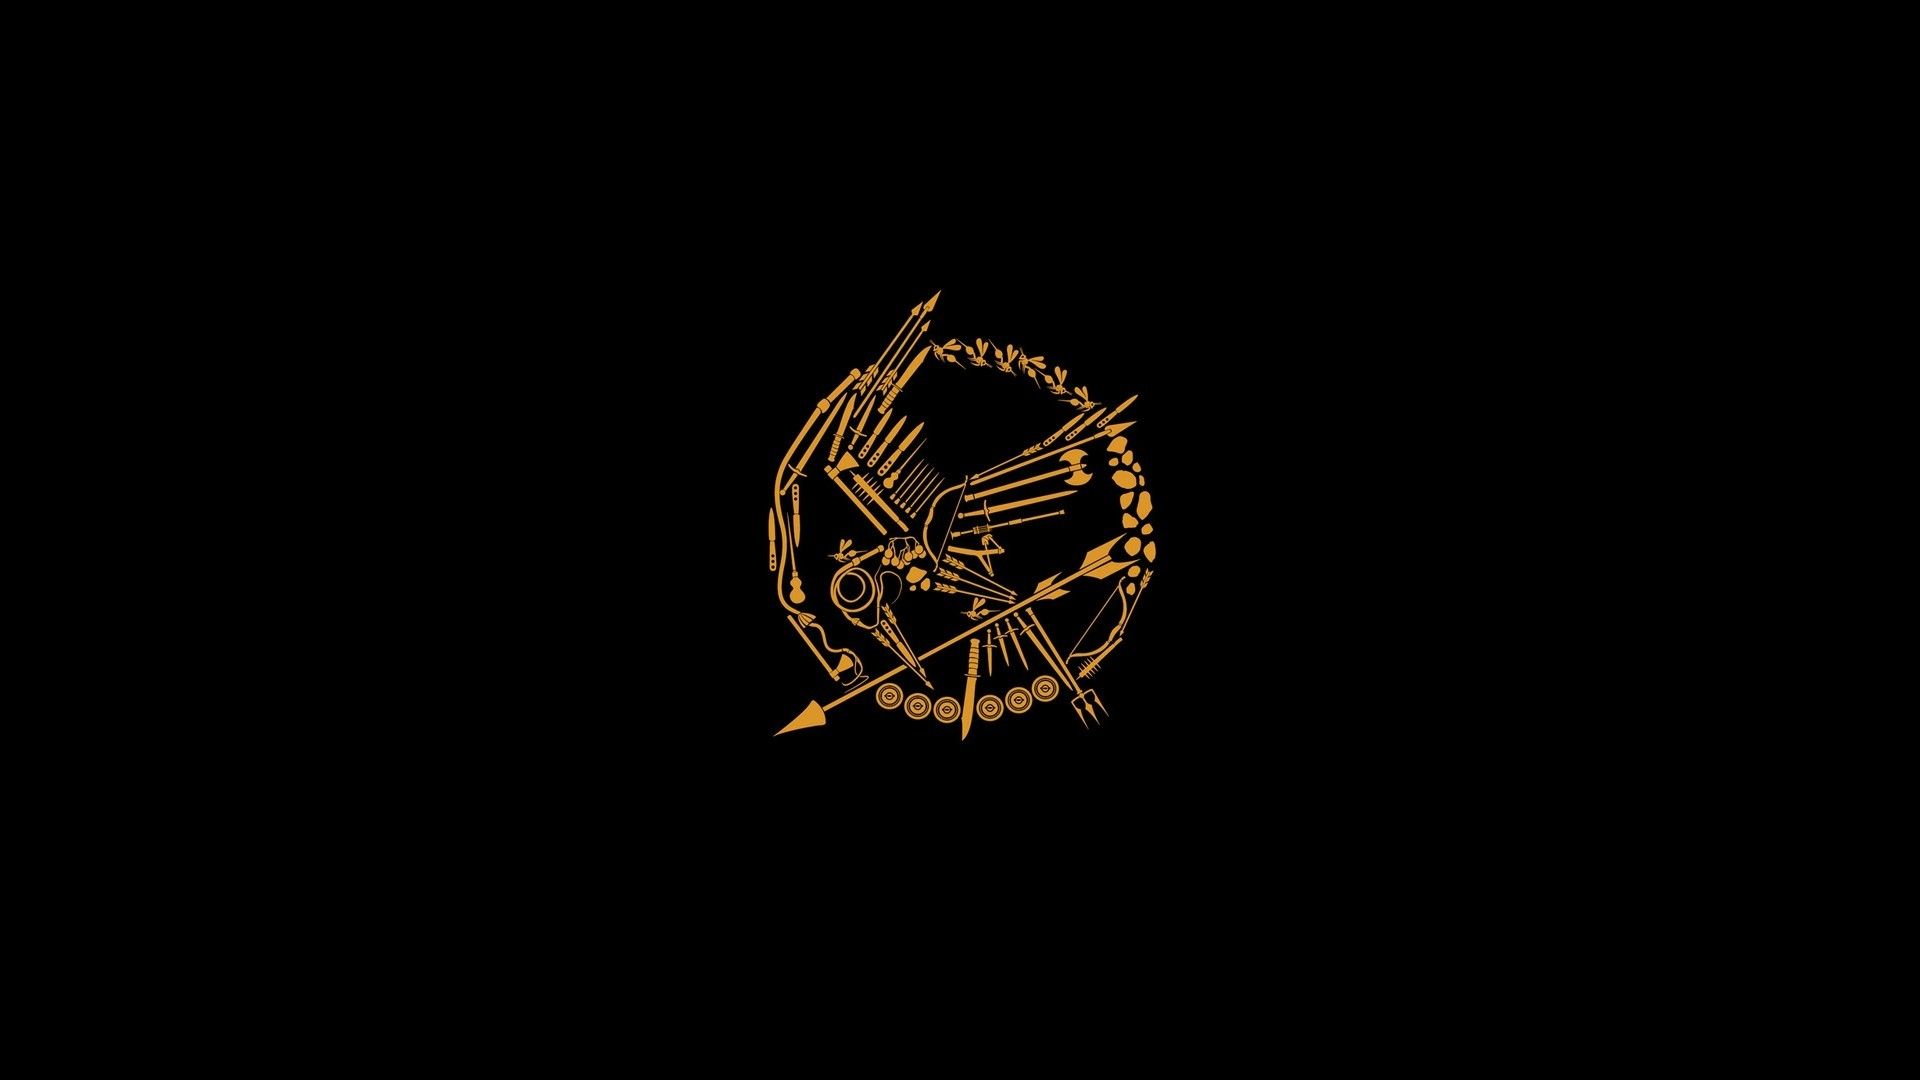 Free download Hunger Games Wallpaper for Computer